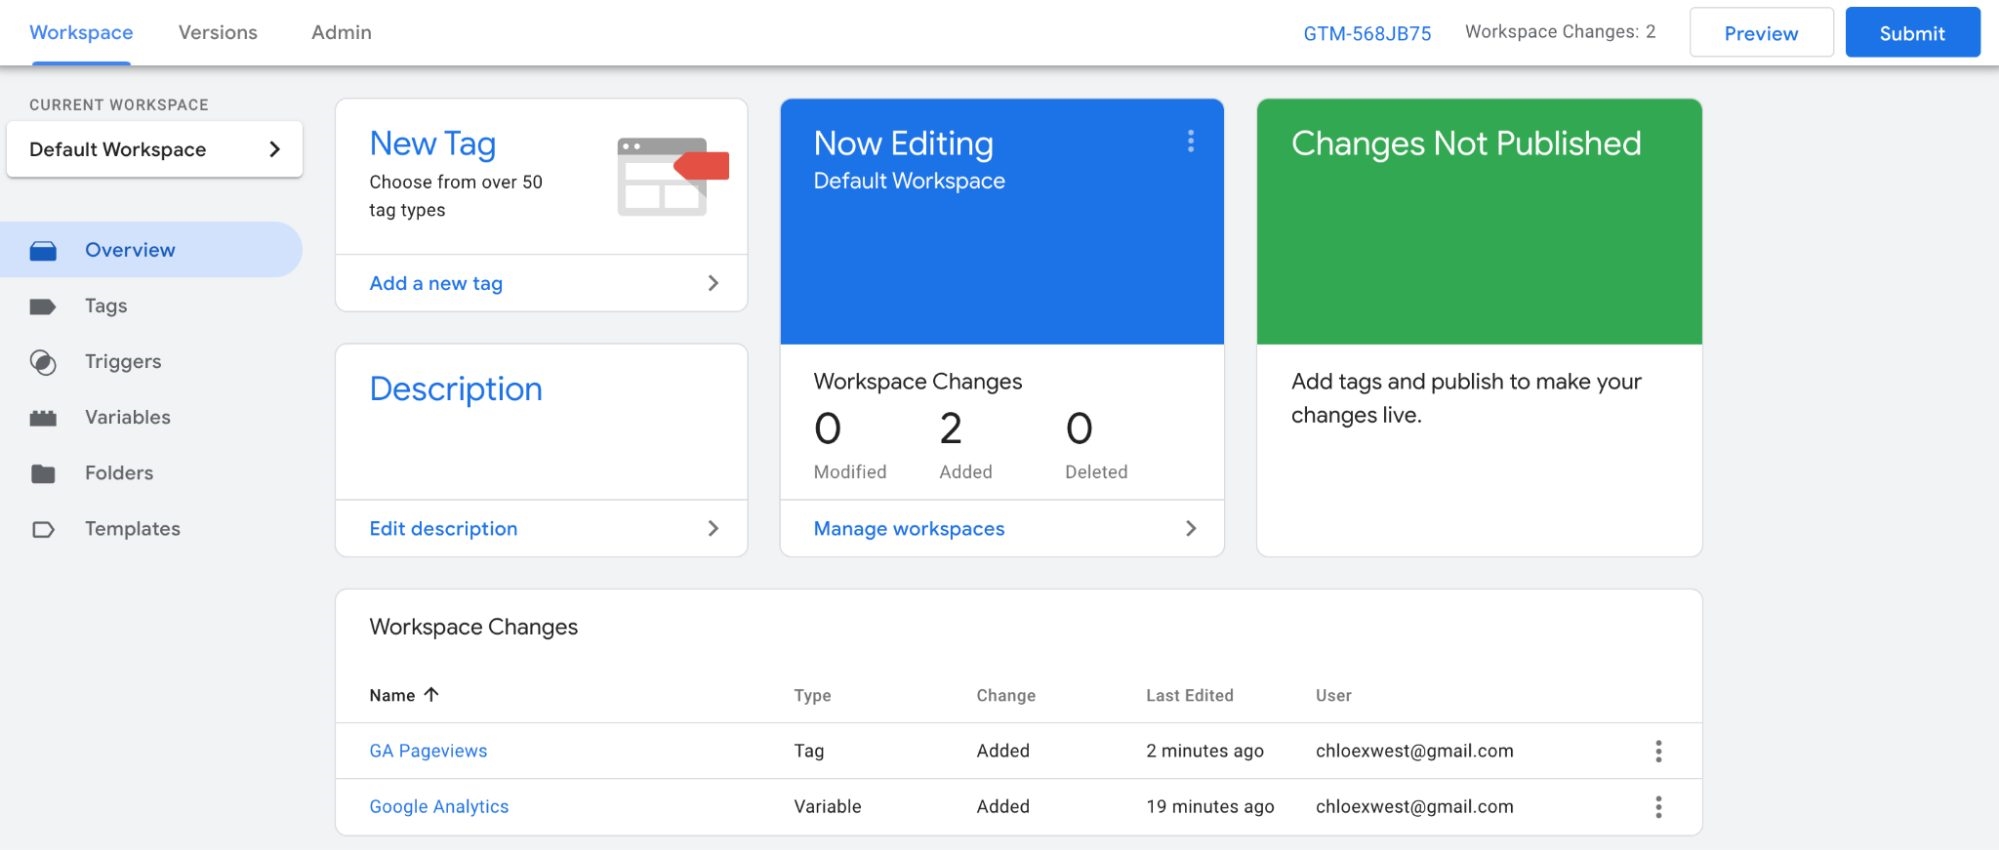 The Complete Guide to Google Tag Manager